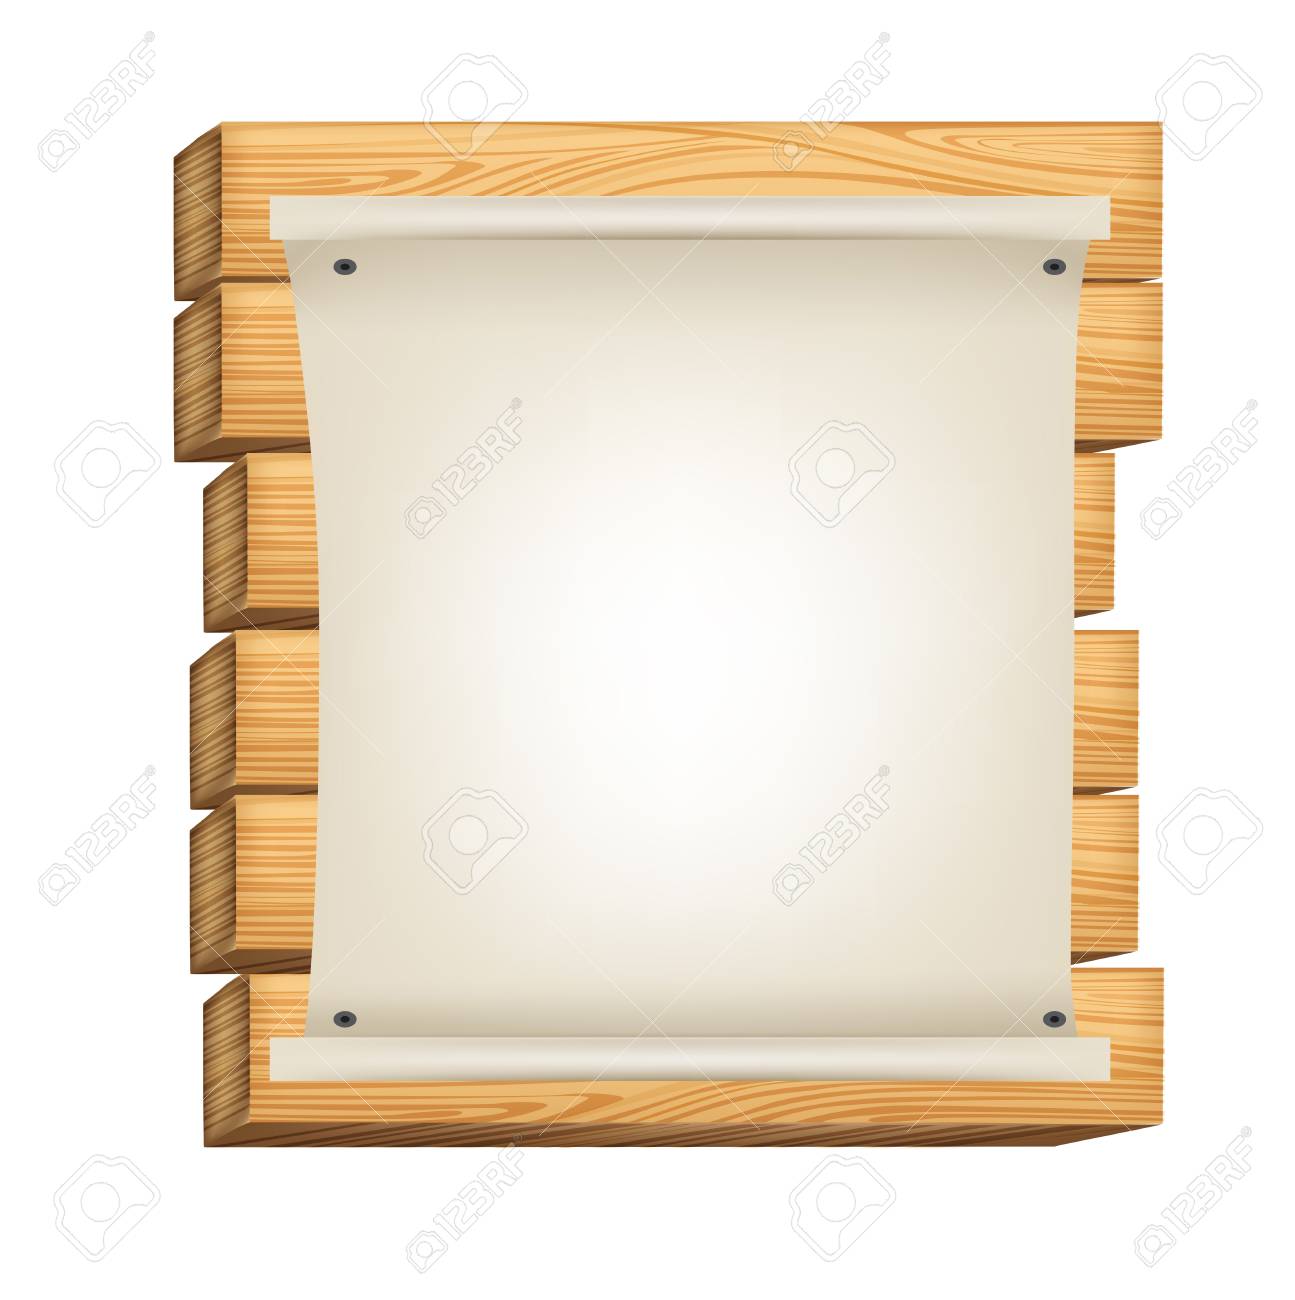 Paper Roll Sign On Wooden Board Background Isolated Royalty